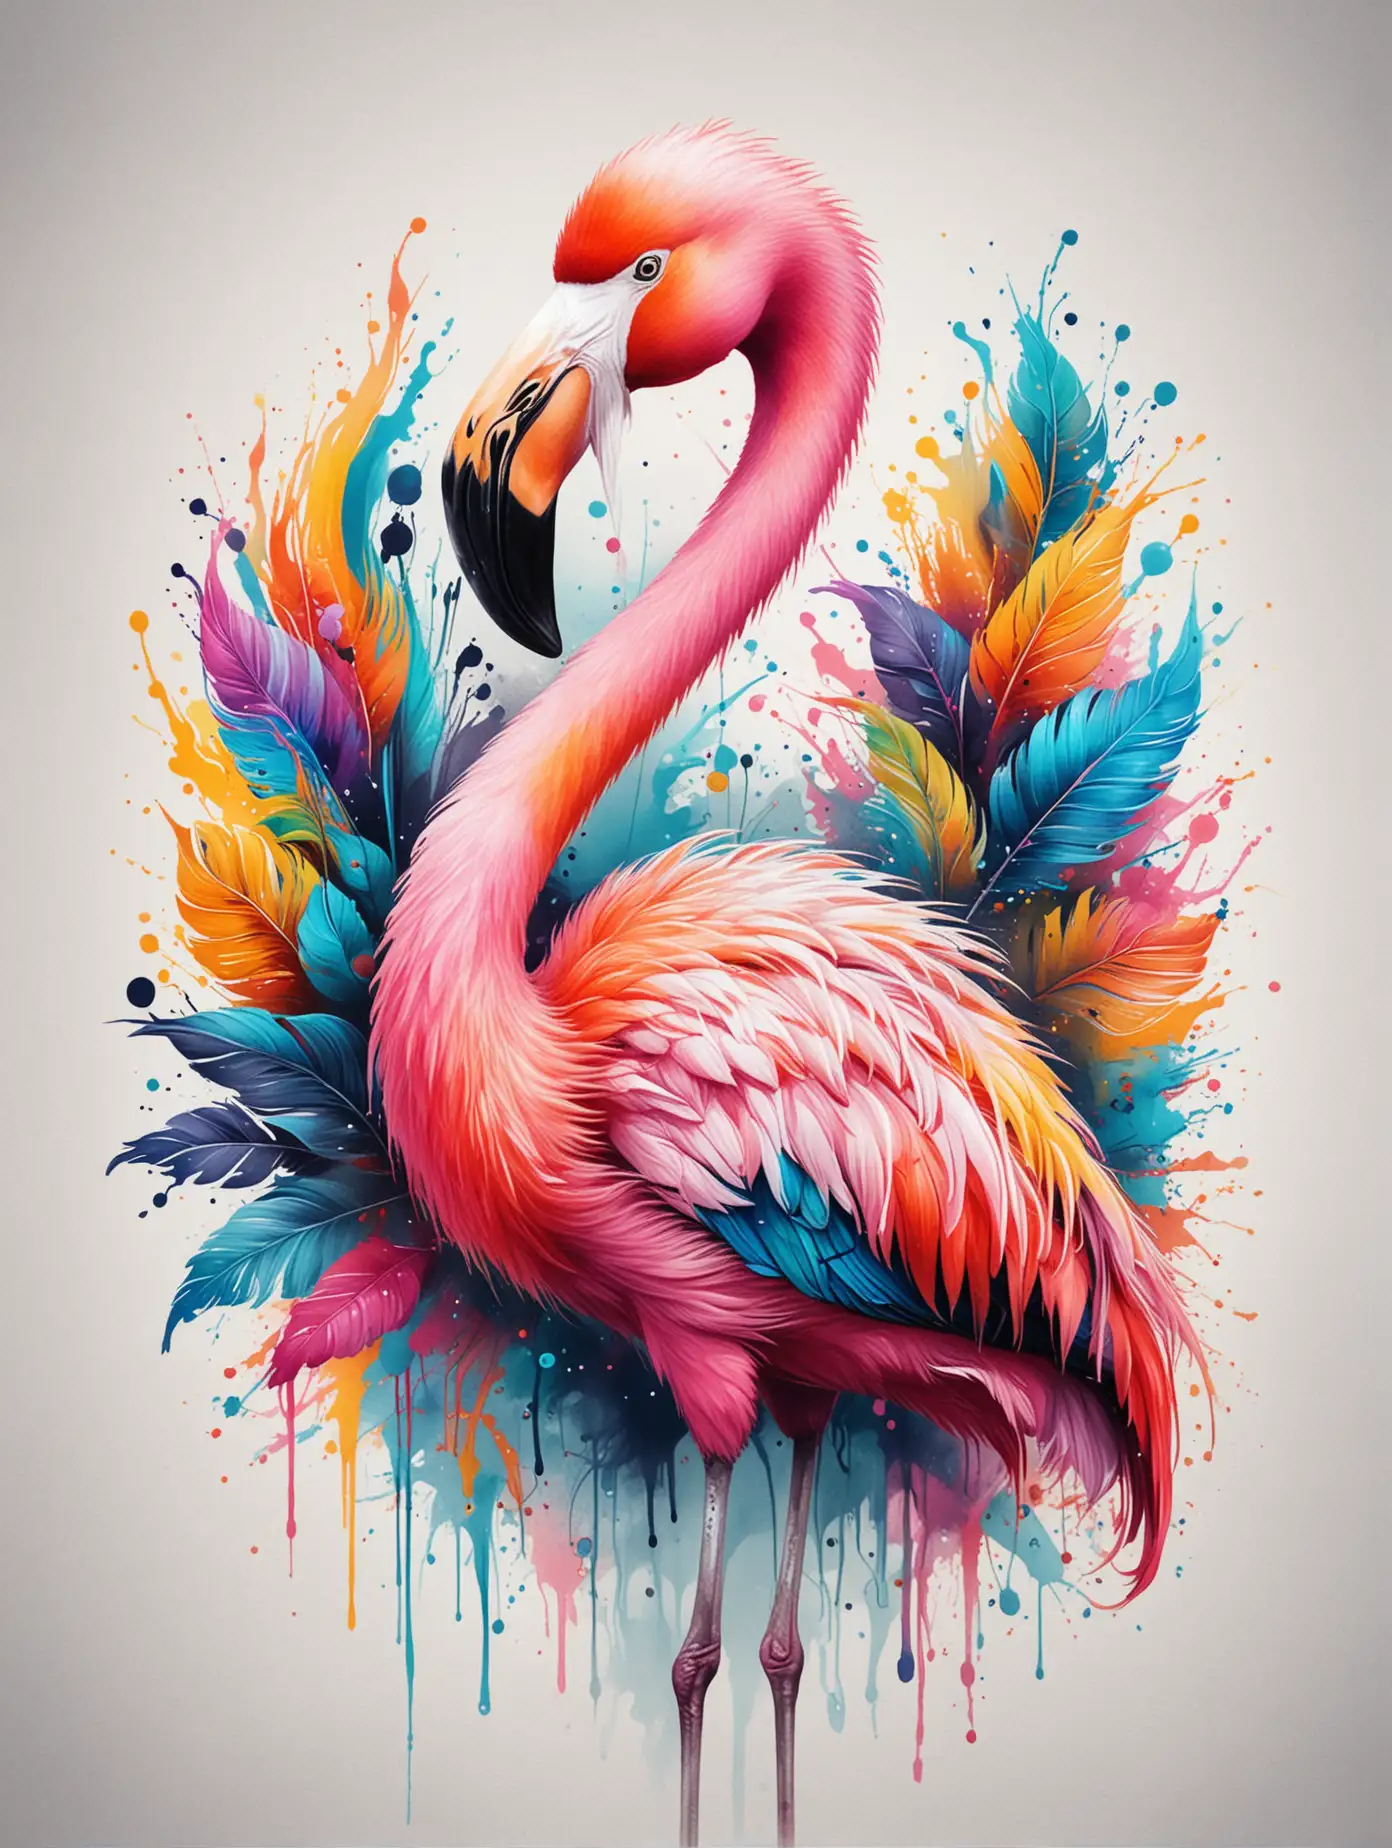 Vibrant Flamingo Art with Cool Tattoos and Piercings Against a Bright Background